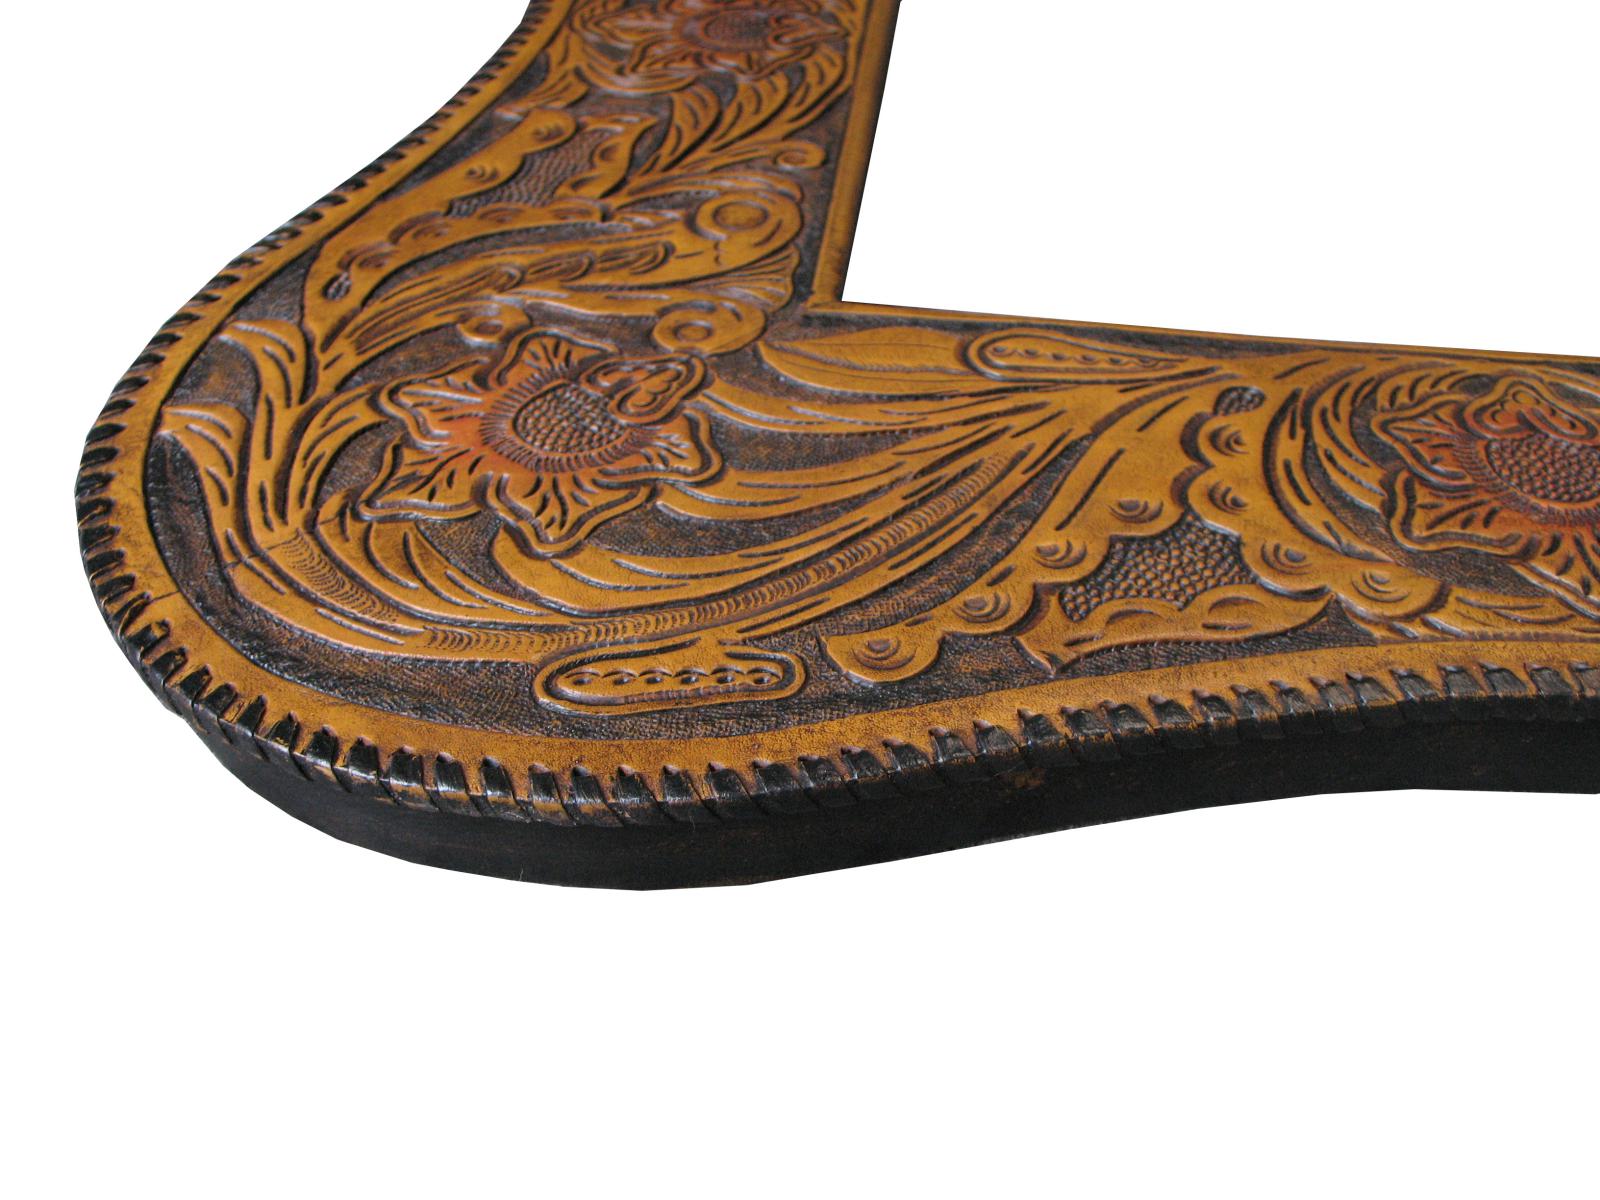 leather frames western hand tooled/tooling floral design with Serpentine shape, hand stitch edge lacing